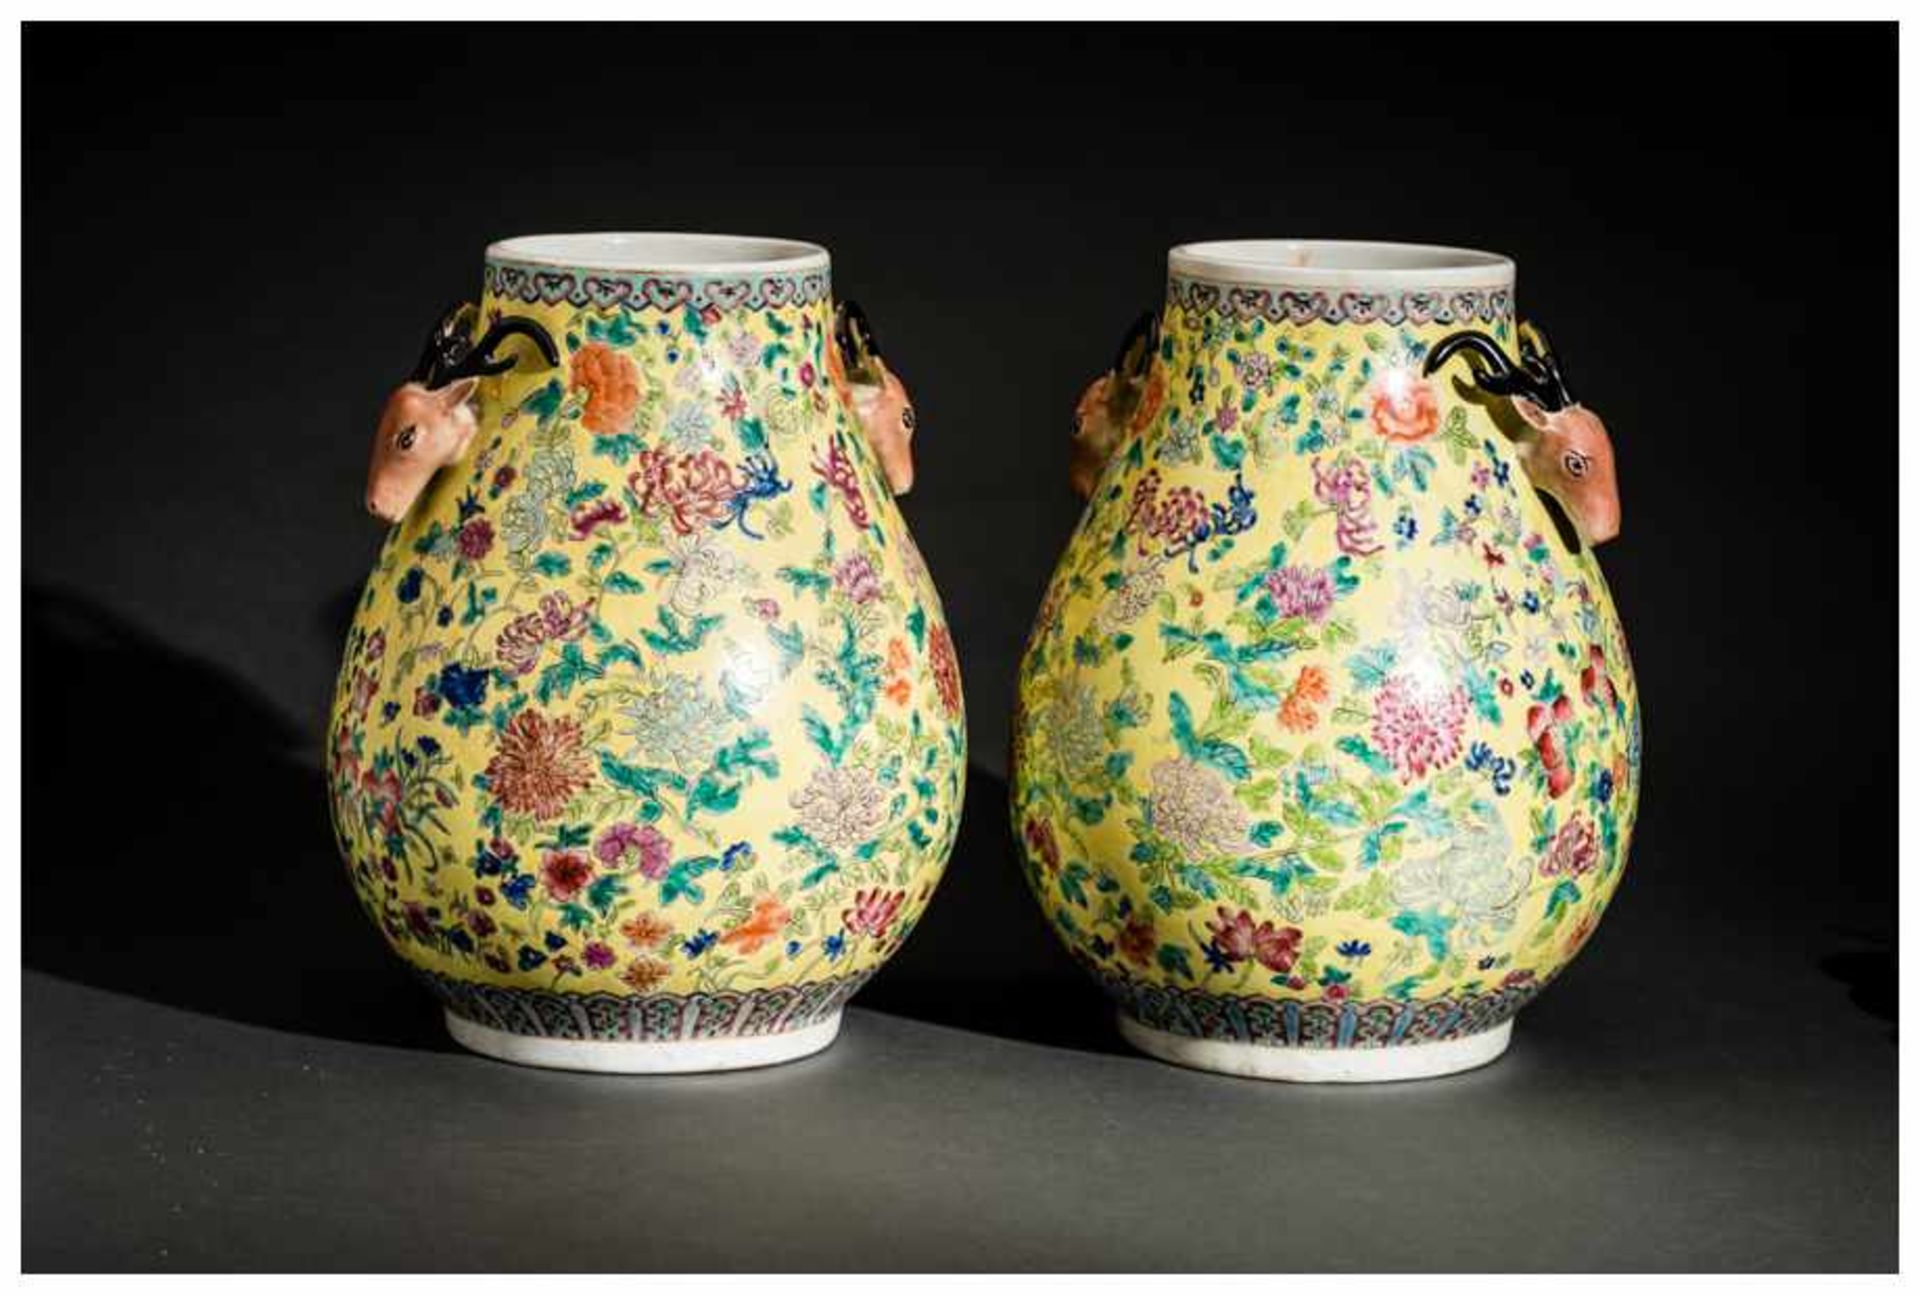 PAIR OF VASES WITH STAG HEADS Porcelain with enamel painting. China, in Qianlong era style, Qing - Image 5 of 6